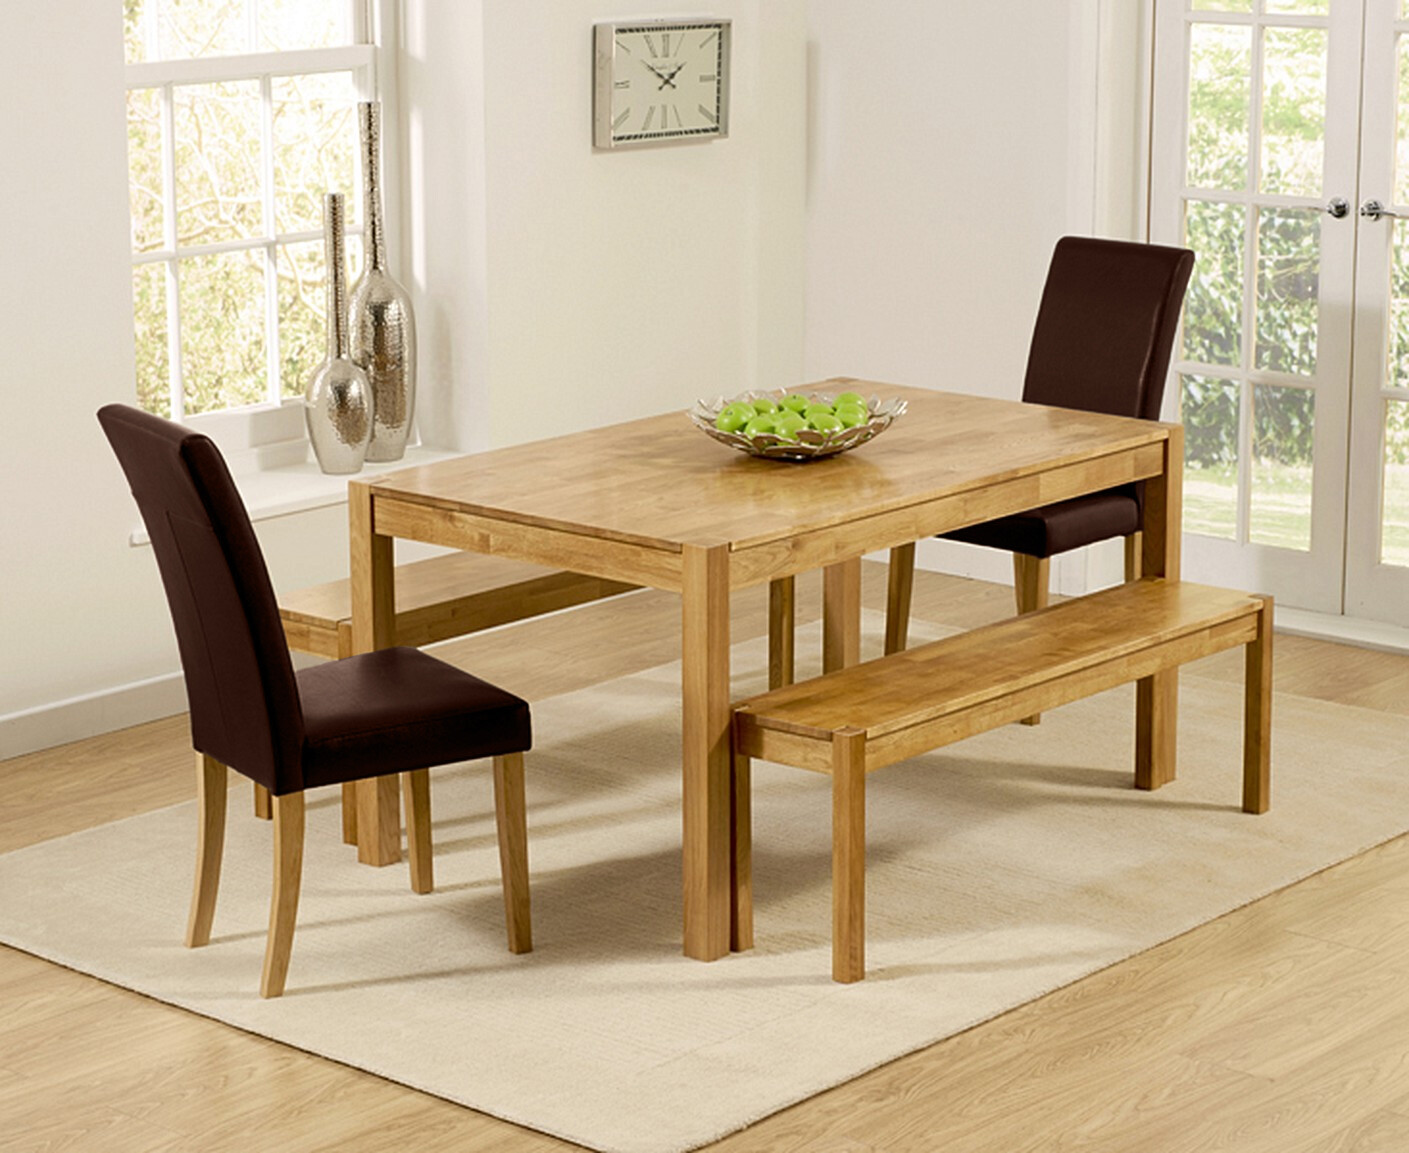 York 150cm Solid Oak Dining Table With 2 Brown Olivia Chairs And 1 York Benches